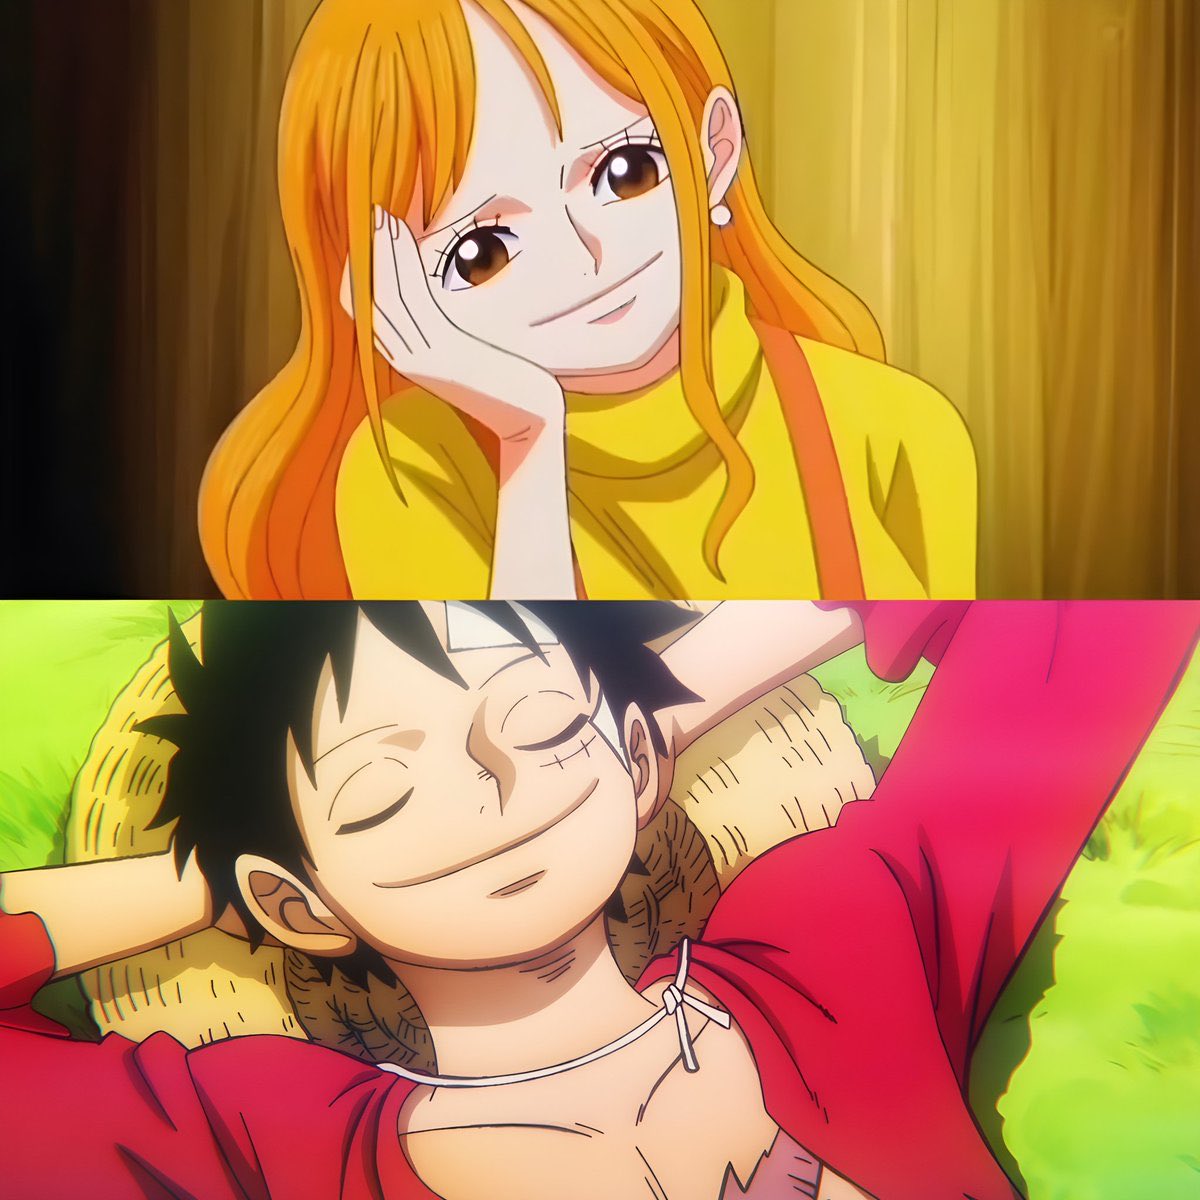 Ship so good other ships want their moments ❤️🧡 #Lunami #ONEPIECE #Luffy #Nami #LuNa